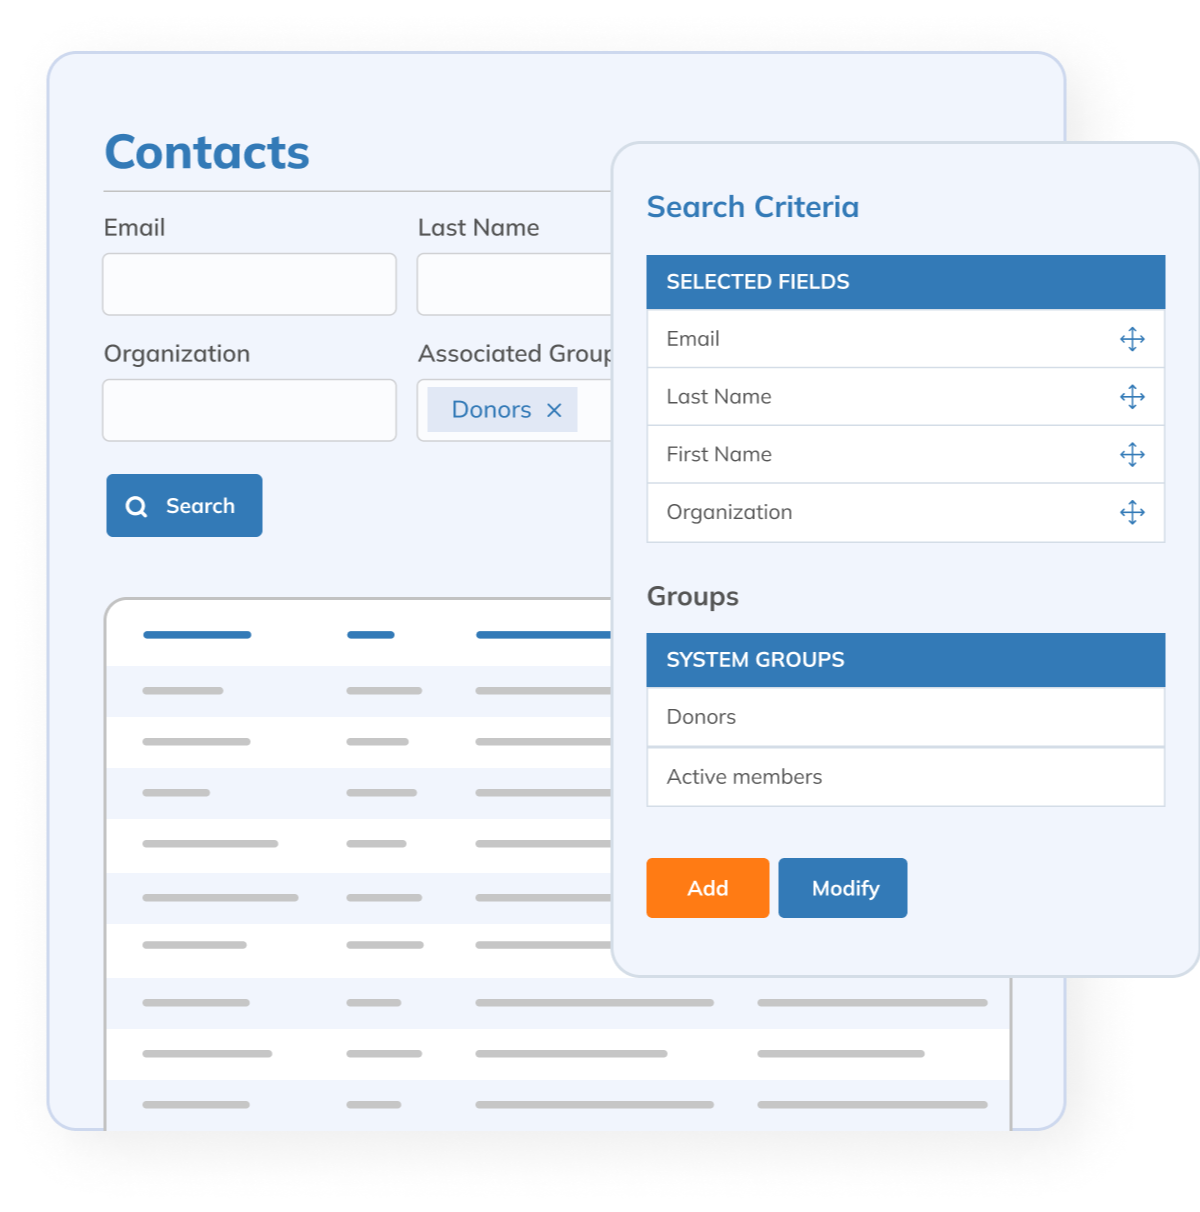 03 - en - Contacts - Customize the structure of your contact database to meet your needs